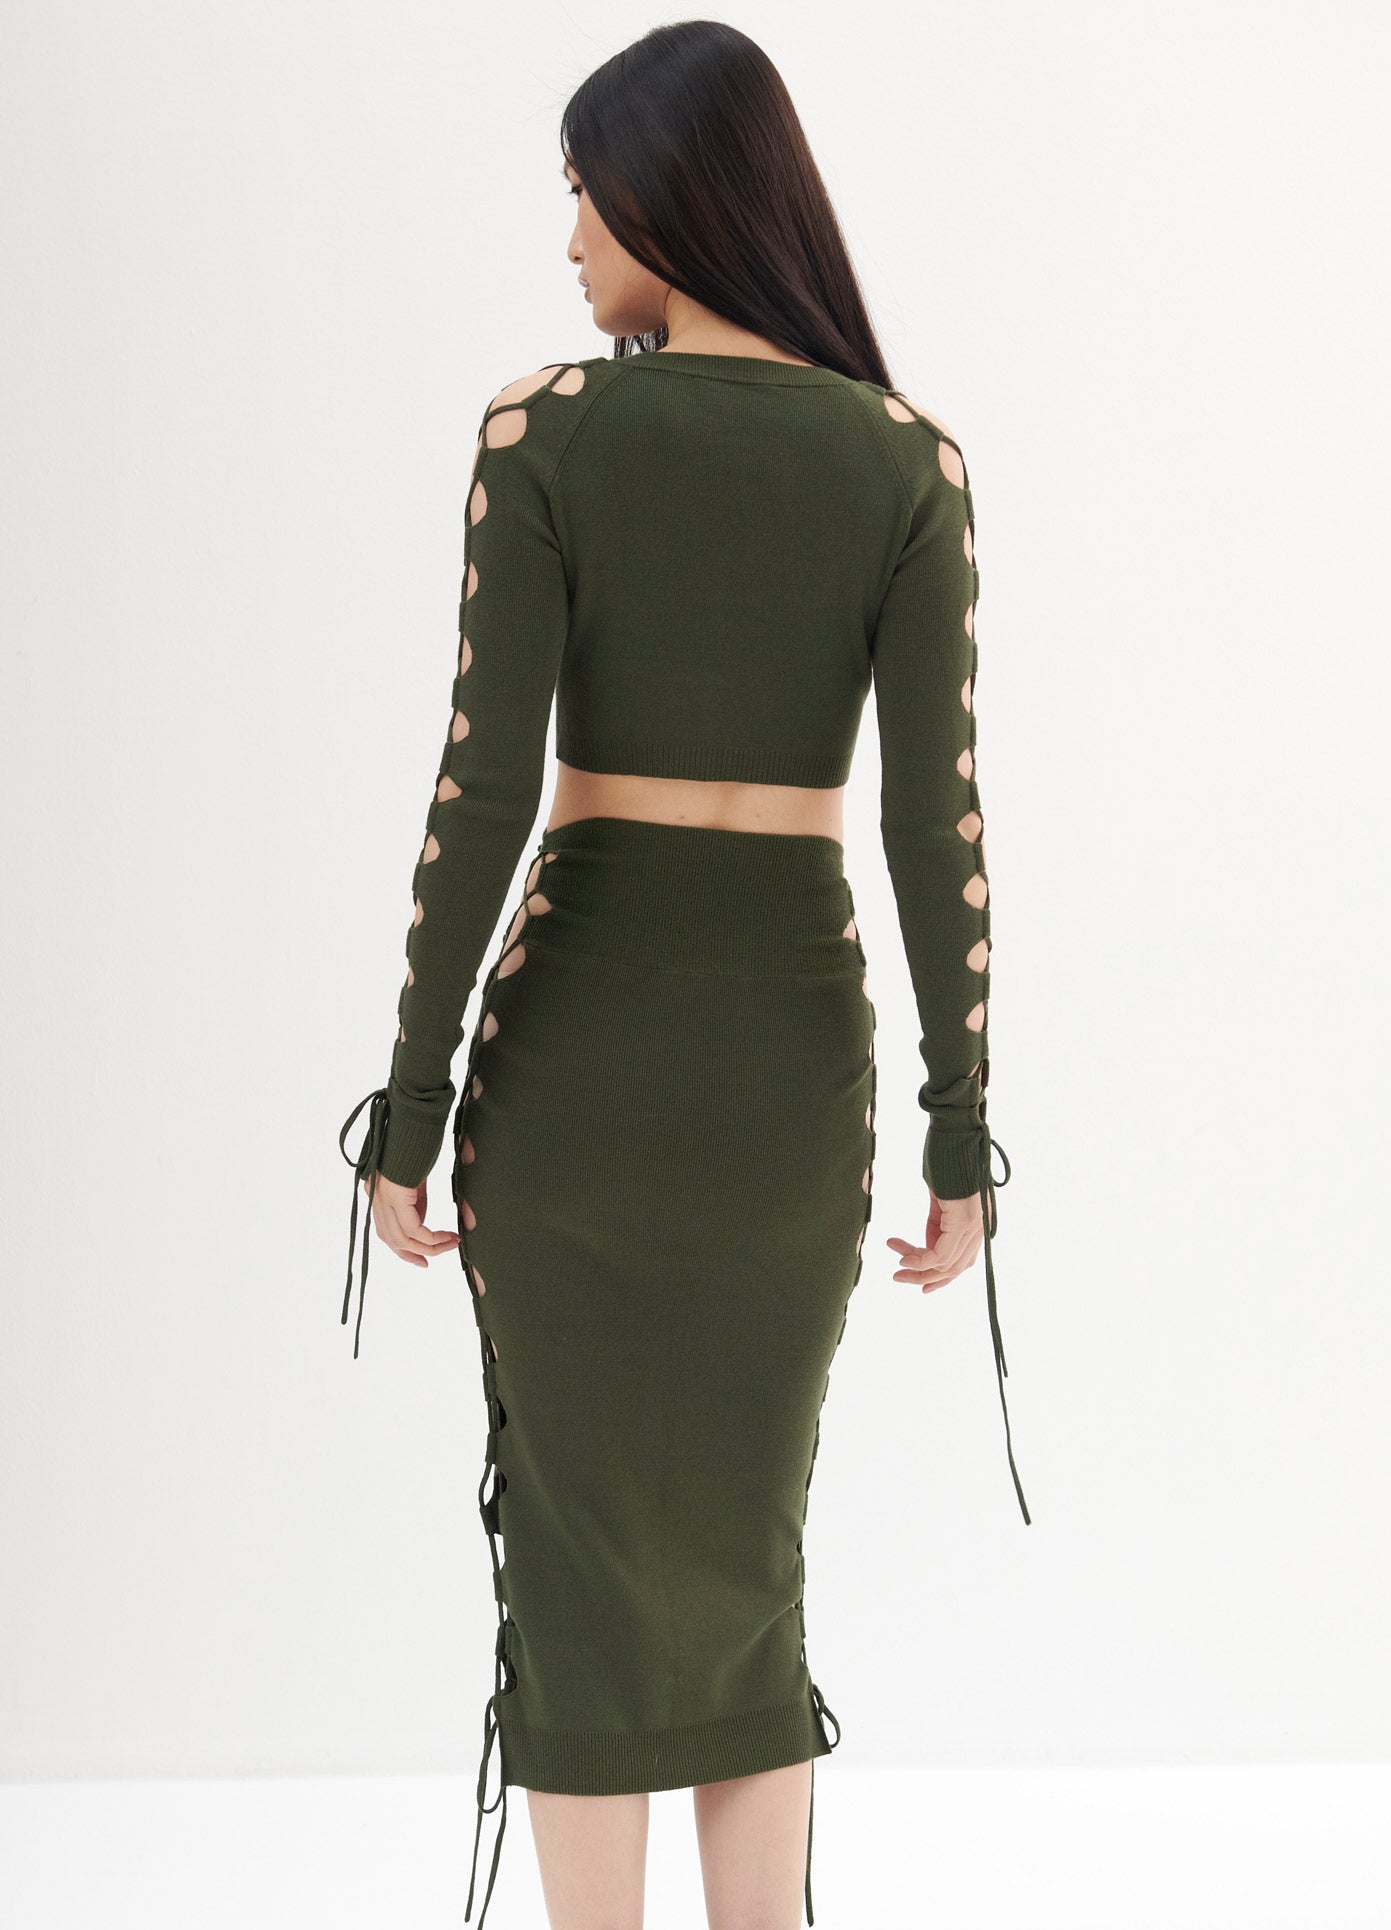 MONSE Lacing Knitted Skirt in Olive on Model Back View